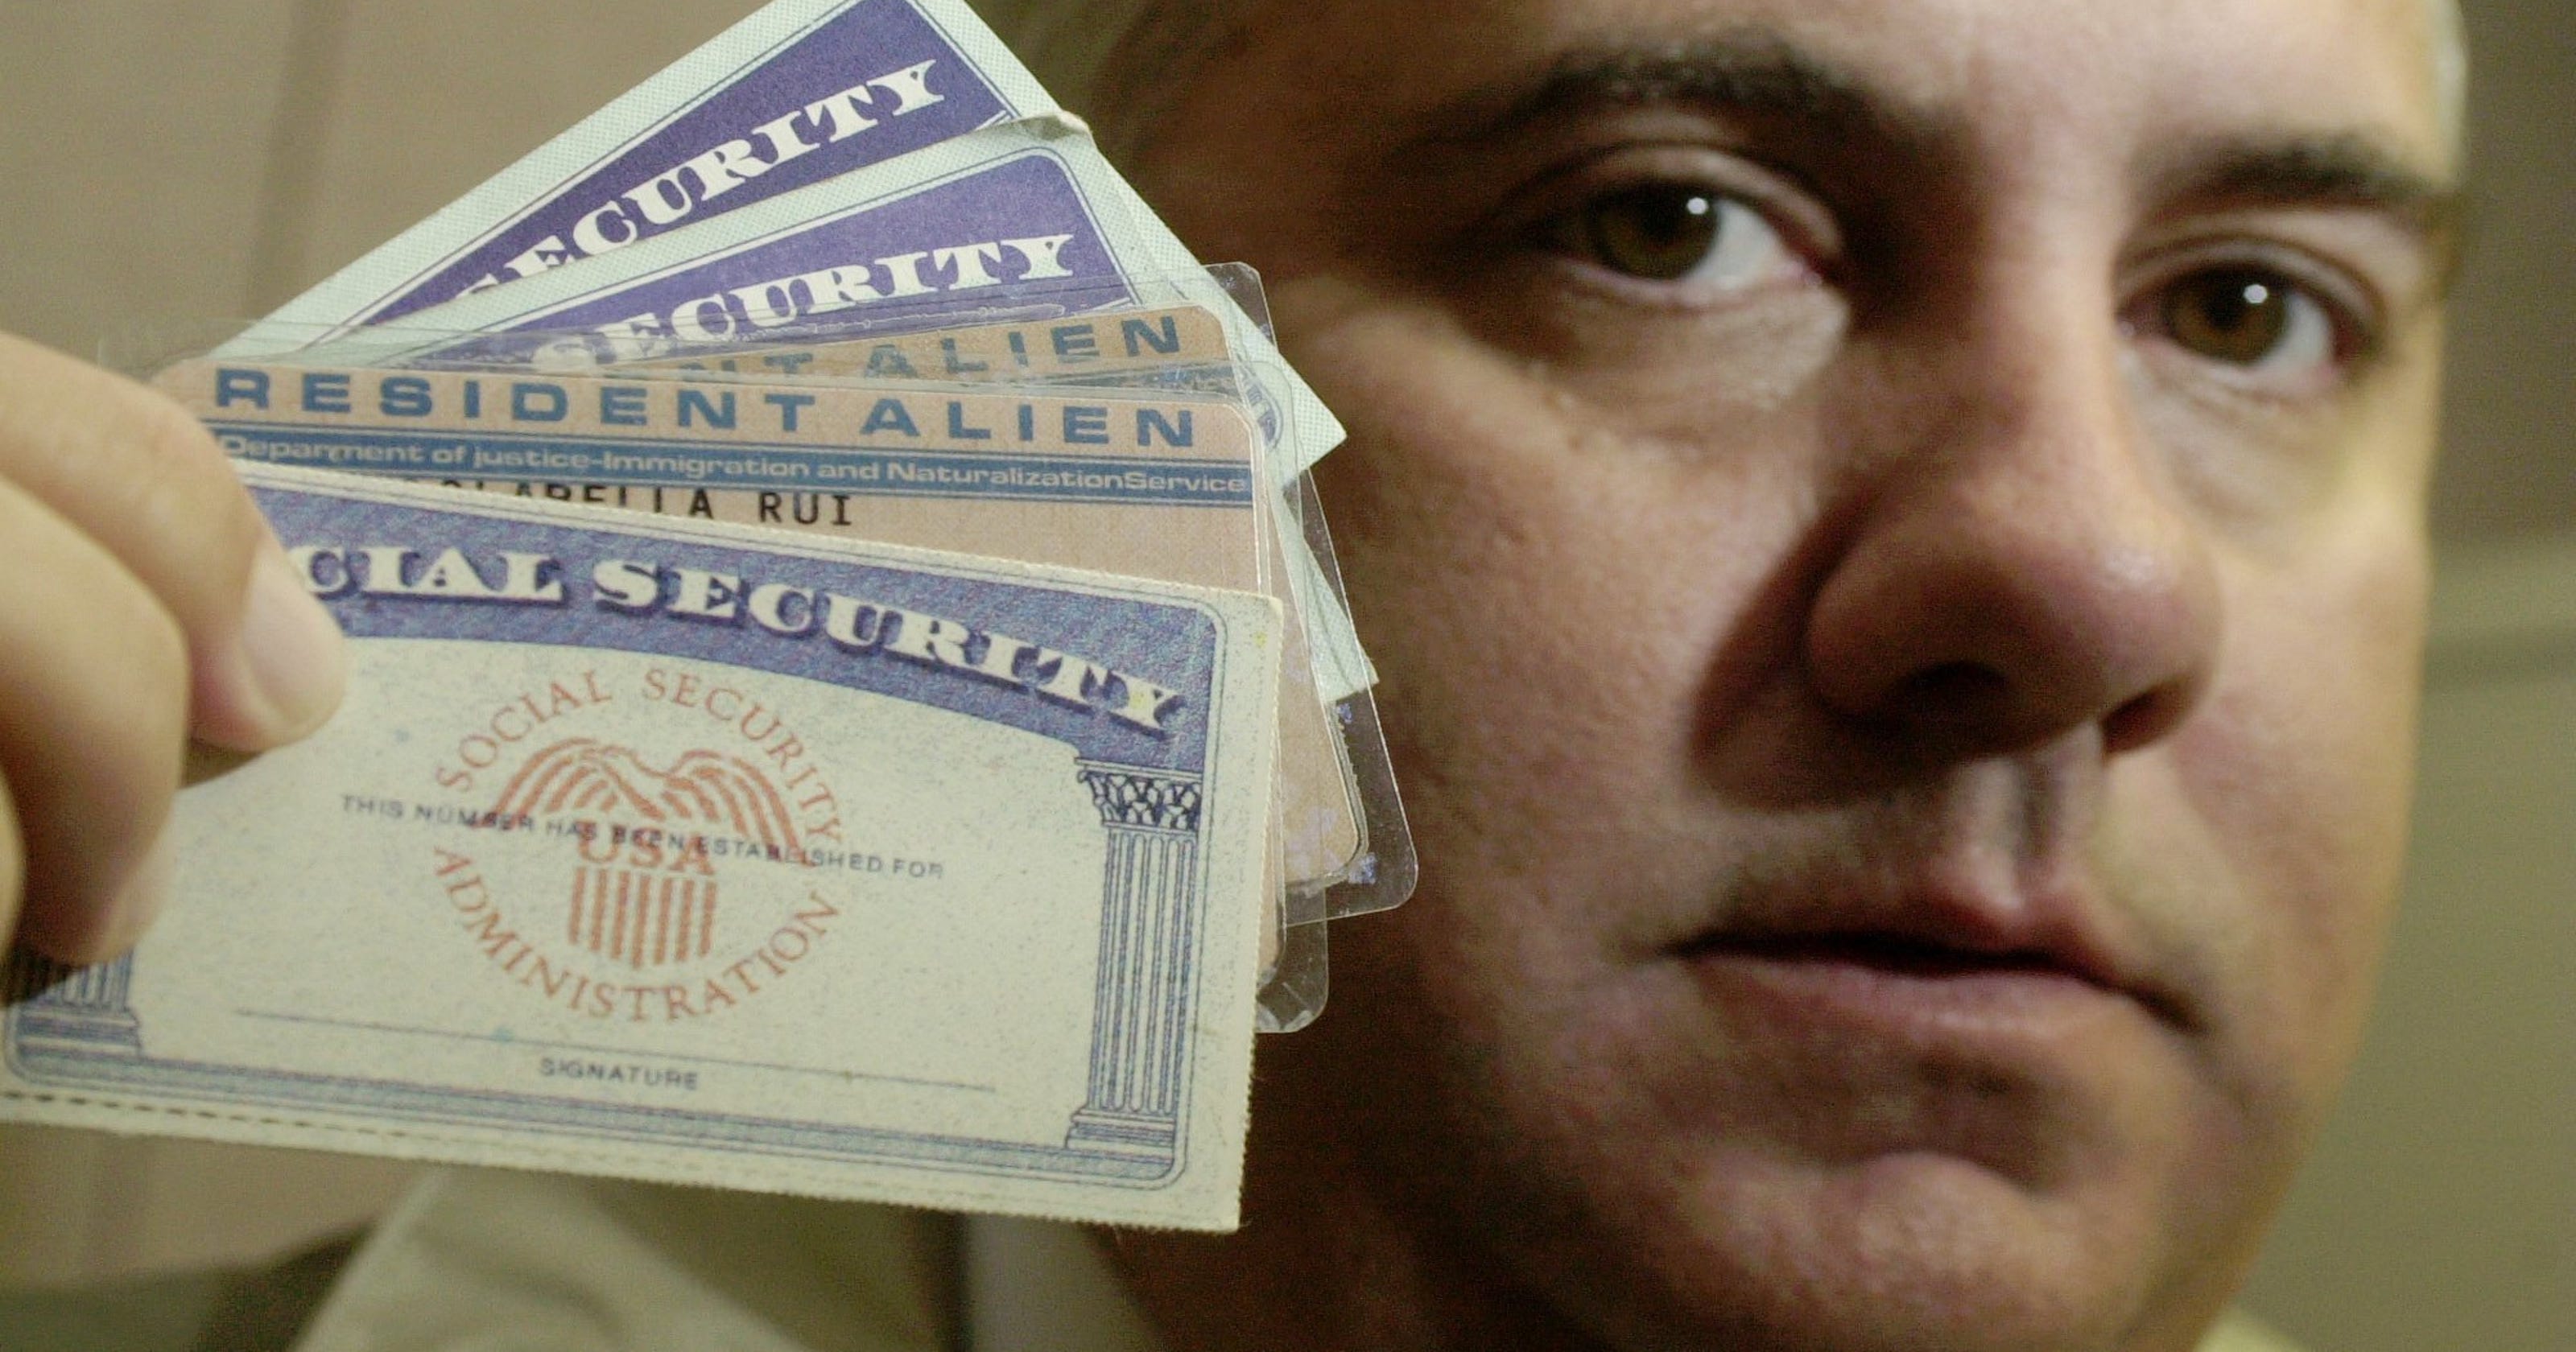 How can you recognize a valid Social Security card?